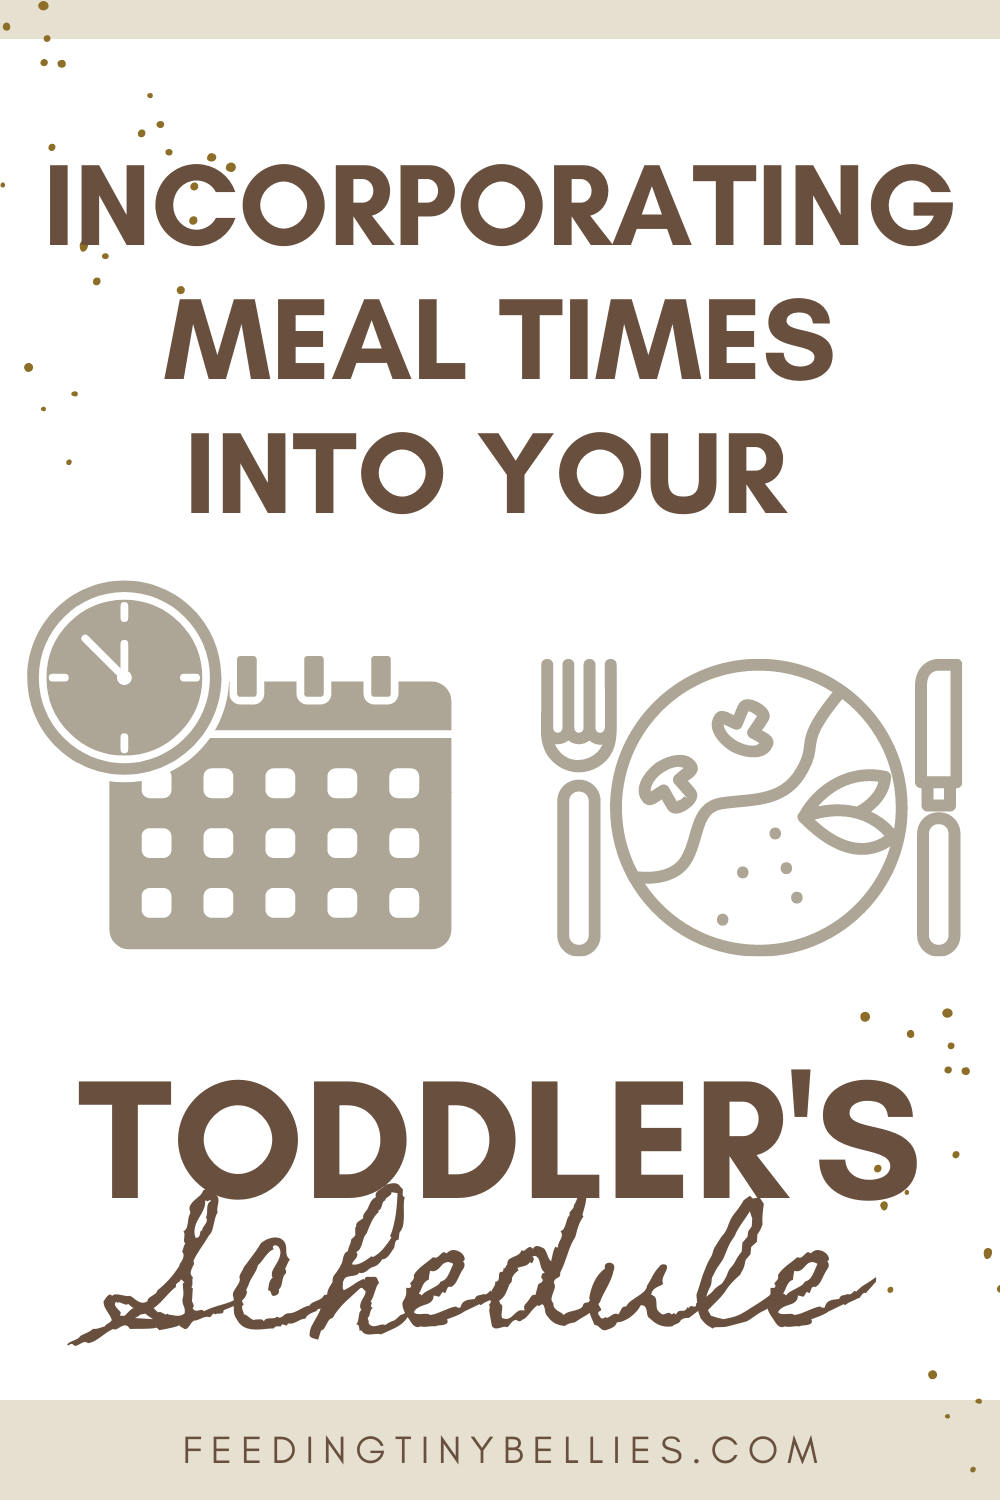 Incorporating meal times into your toddler's schedule